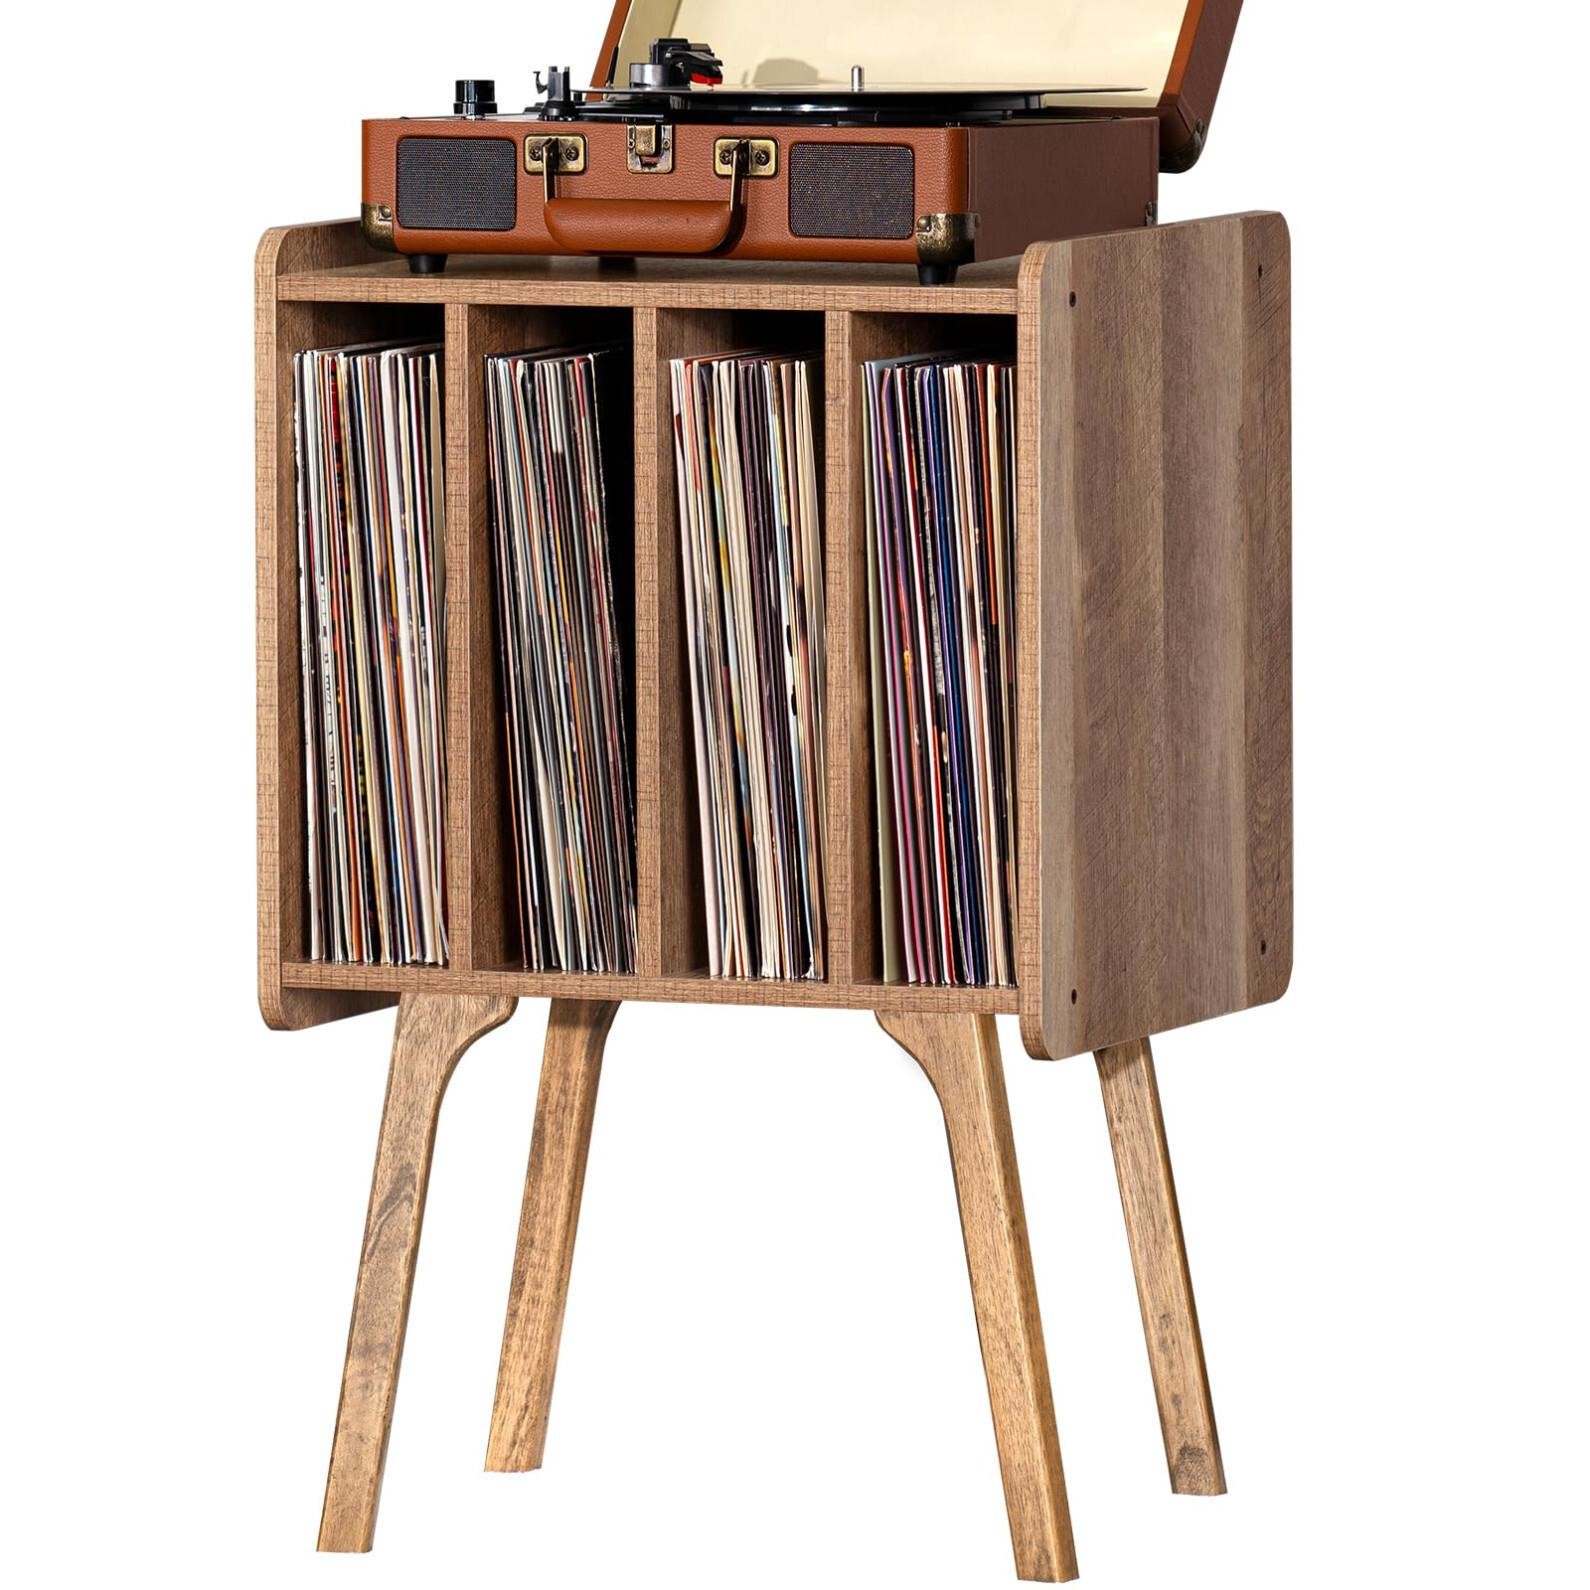 LELELINKY Record Player Stand,Vinyl Record Storage